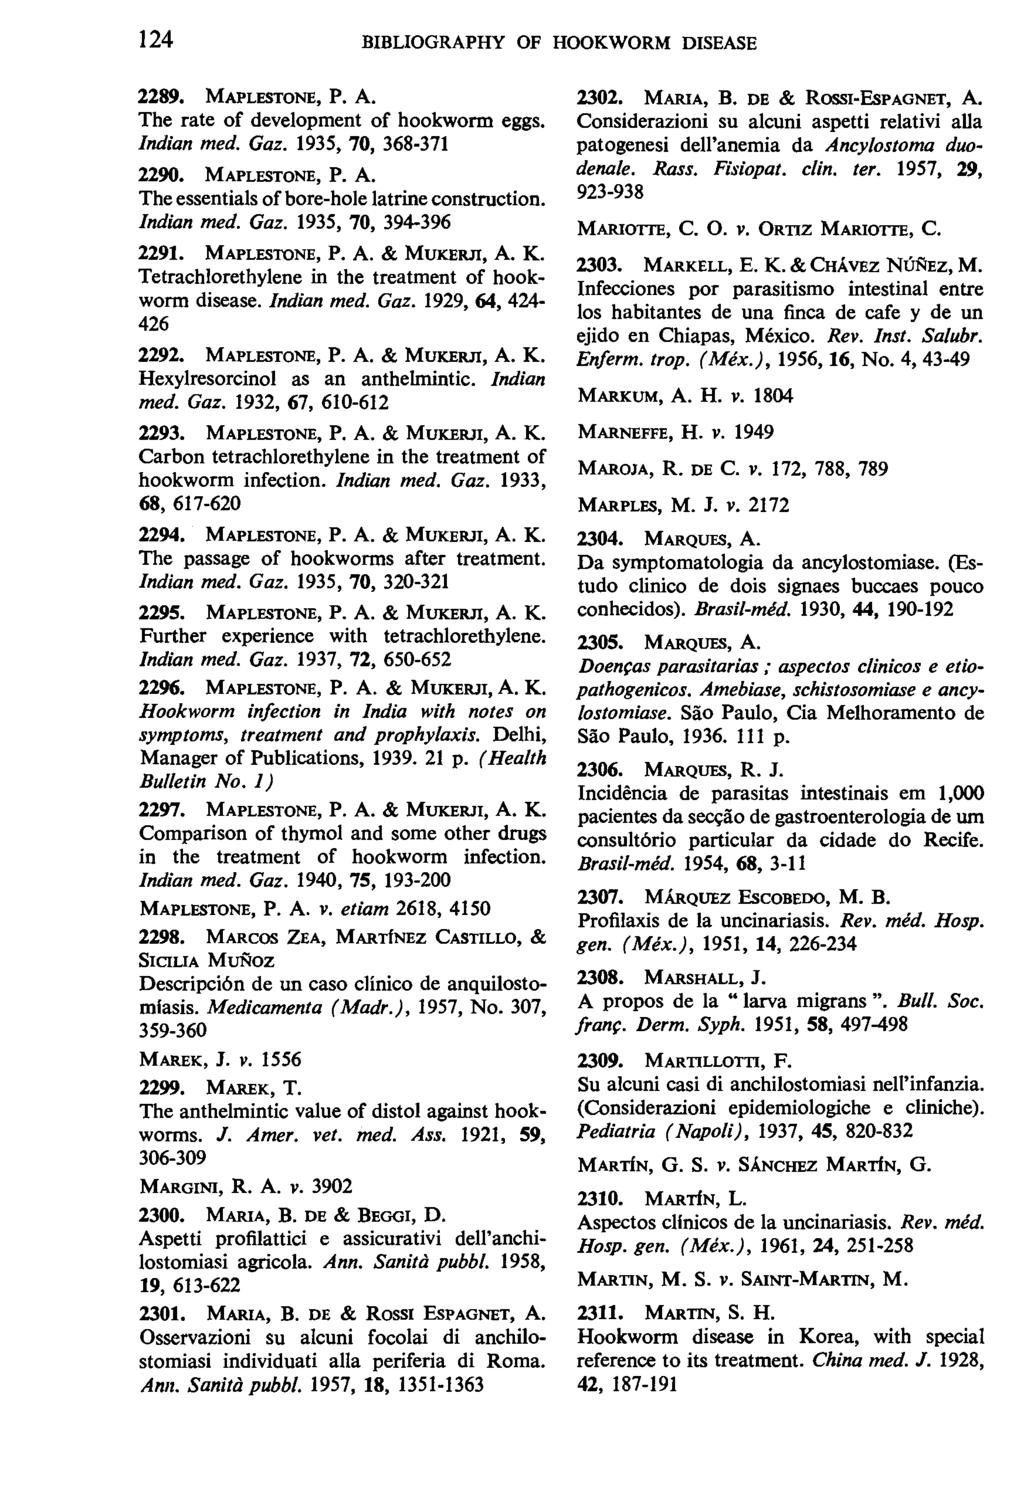 124 BIBLIOGRAPHY OF HOOKWORM DISEASE 2289. MAPLESTONE, P.A. The rate of development of hookworm eggs. Indian med. Gaz. 1935, 70, 368-371 2290. MAPLESTONE, P.A. The essentials of bore-hole latrine construction.